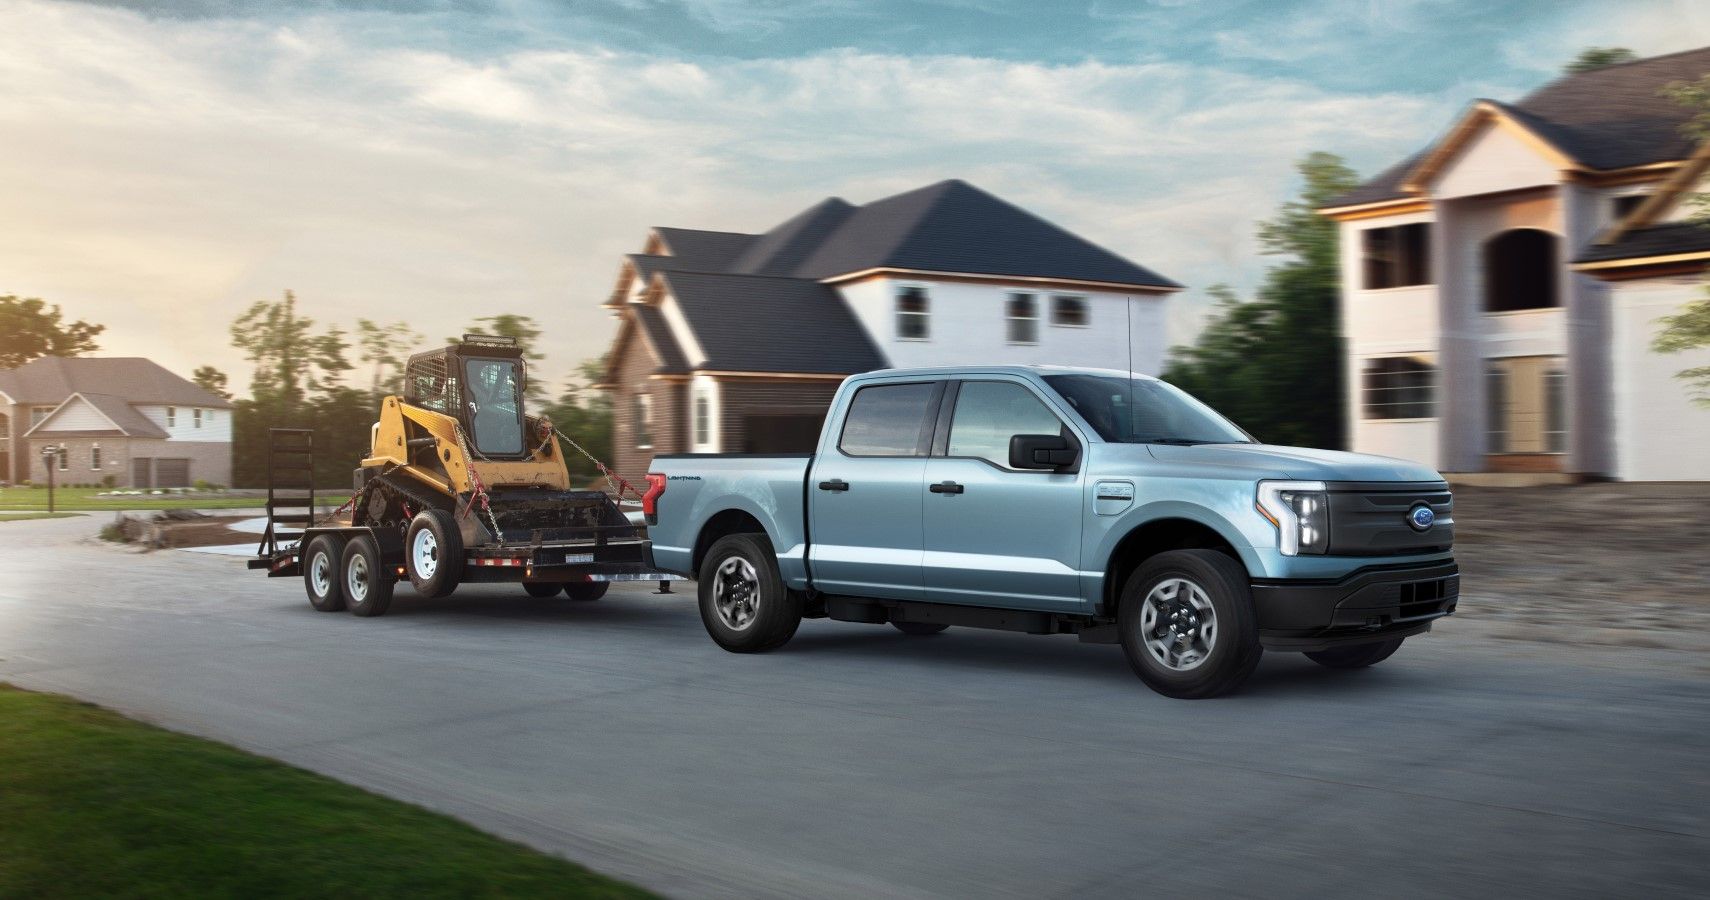 2022 Ford F-150 Lightning Pro towing and payload capacities